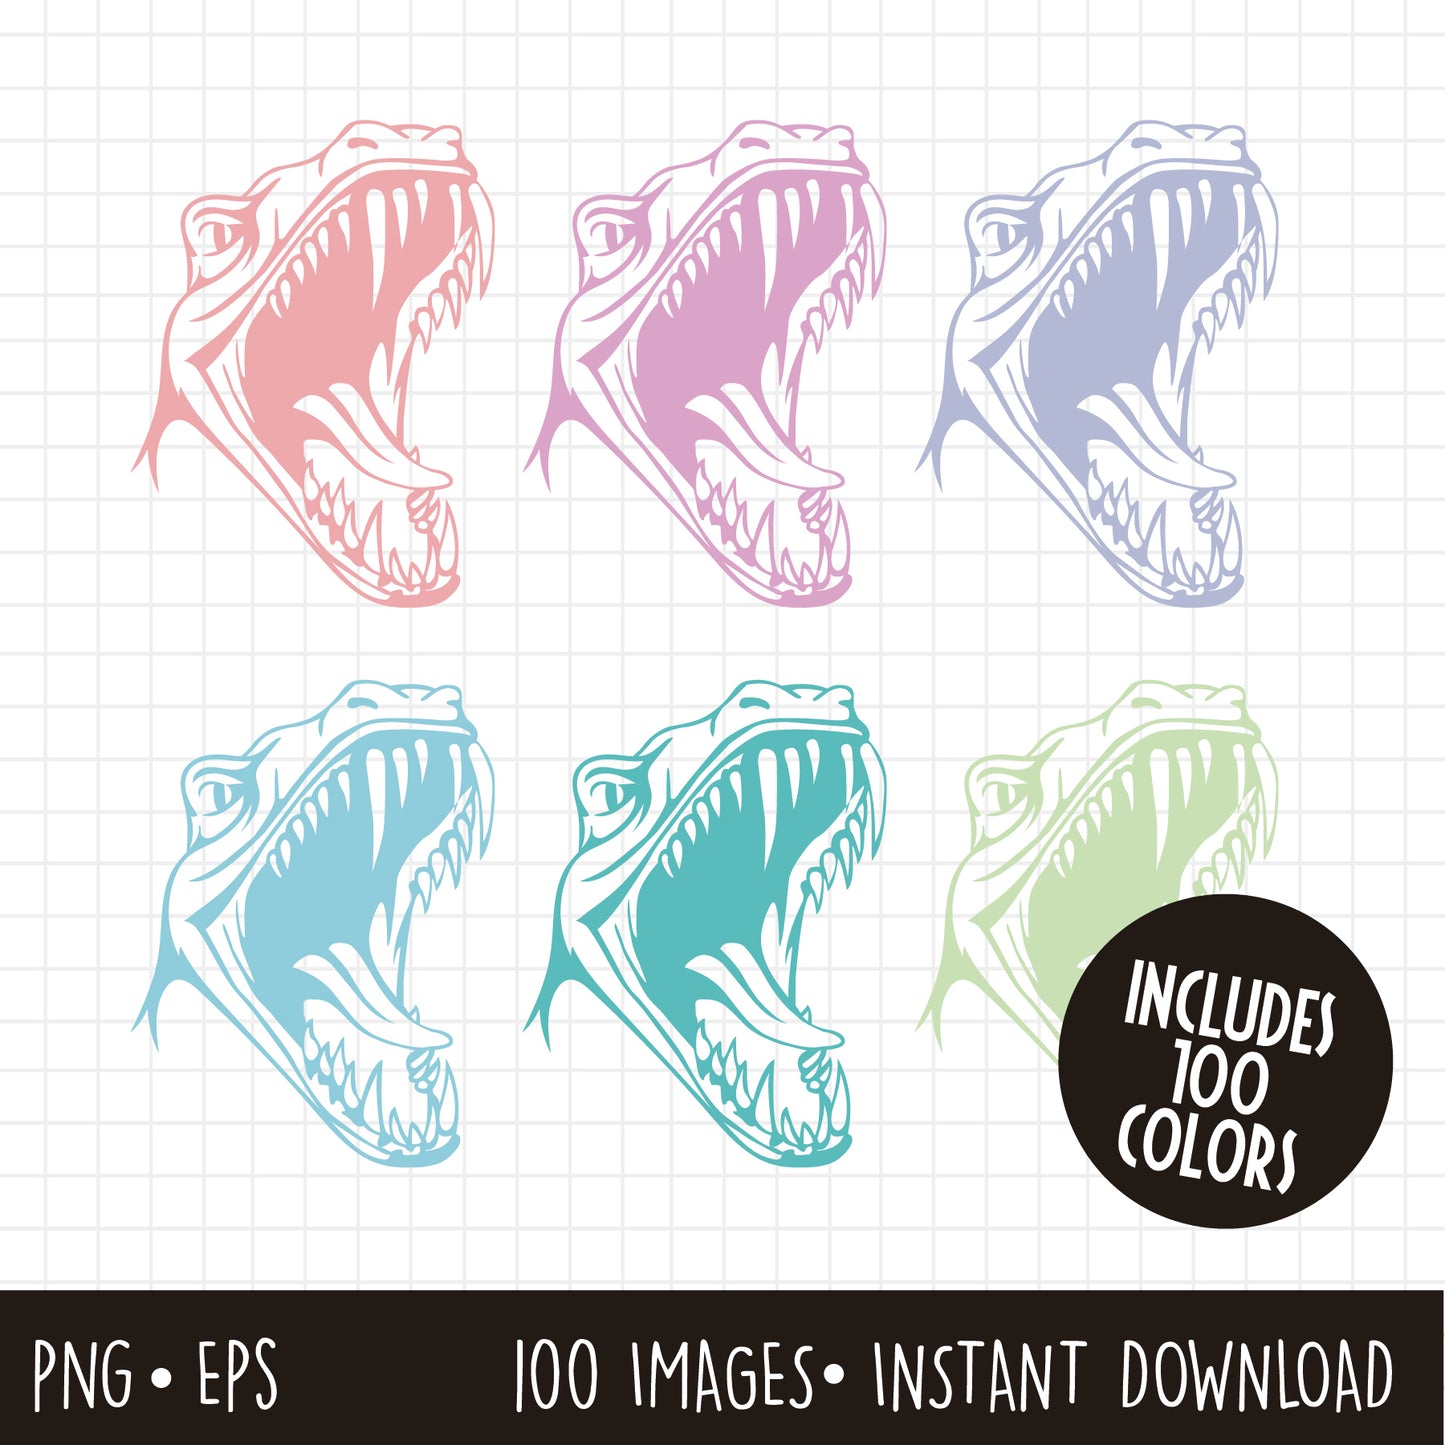 COD799 - Dinosaur Clipart, Jurasic Park Digital Clipart - Instant Download - PNG files included